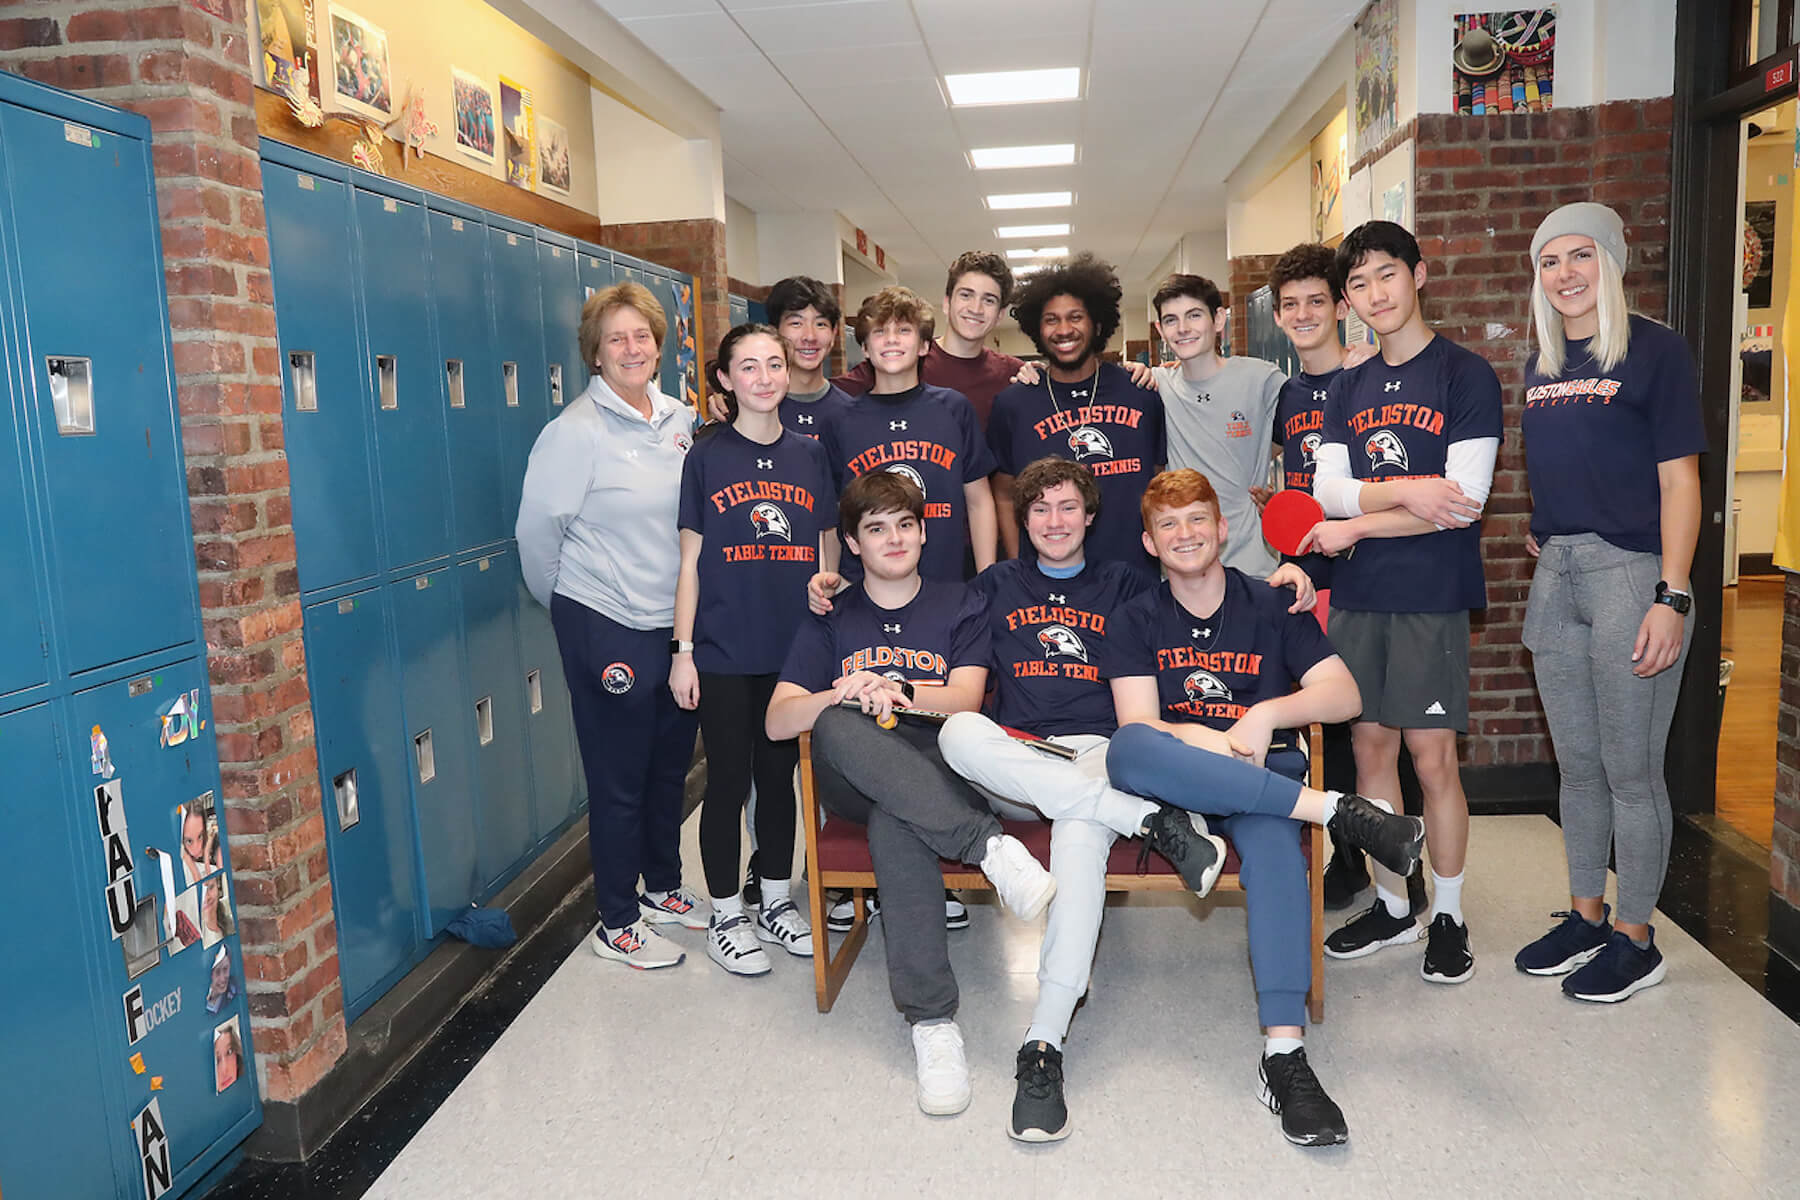 Fieldston Upper table tennis team poses for group photo in hallway; some students stand, while others sit in front on a bench.